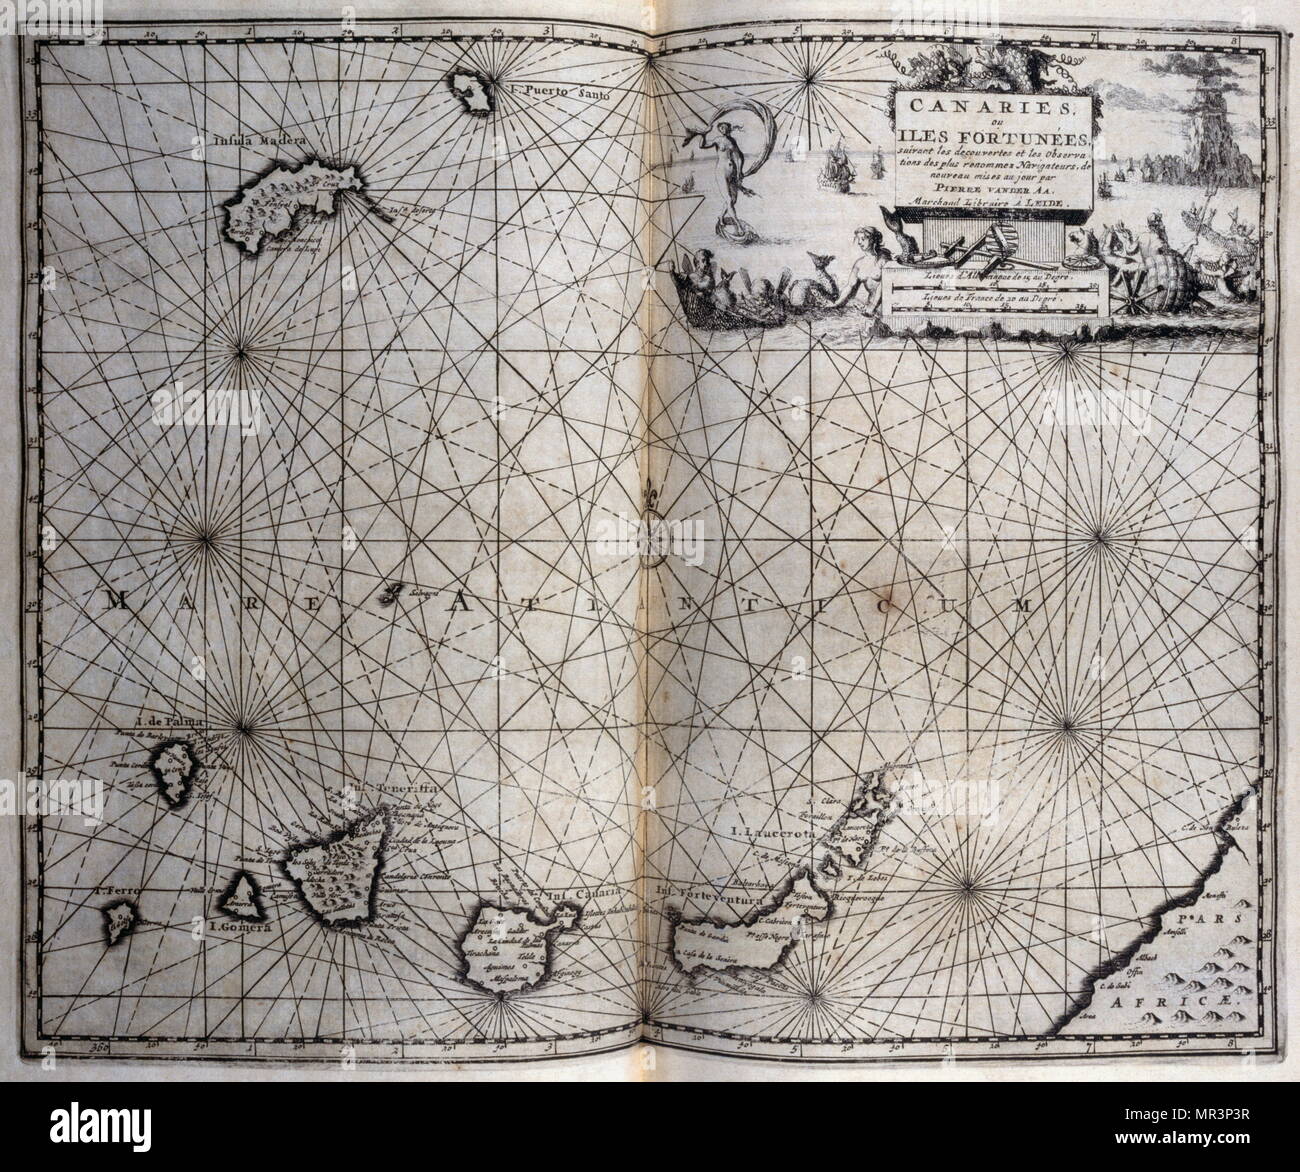 Map of the Canary Islands. From voyages made to Persia and India 1727, by Johan Albrecht de Mandelslo (1616–1644). seventeenth-century German adventurer, who wrote about his travels through Persia and India. Stock Photo